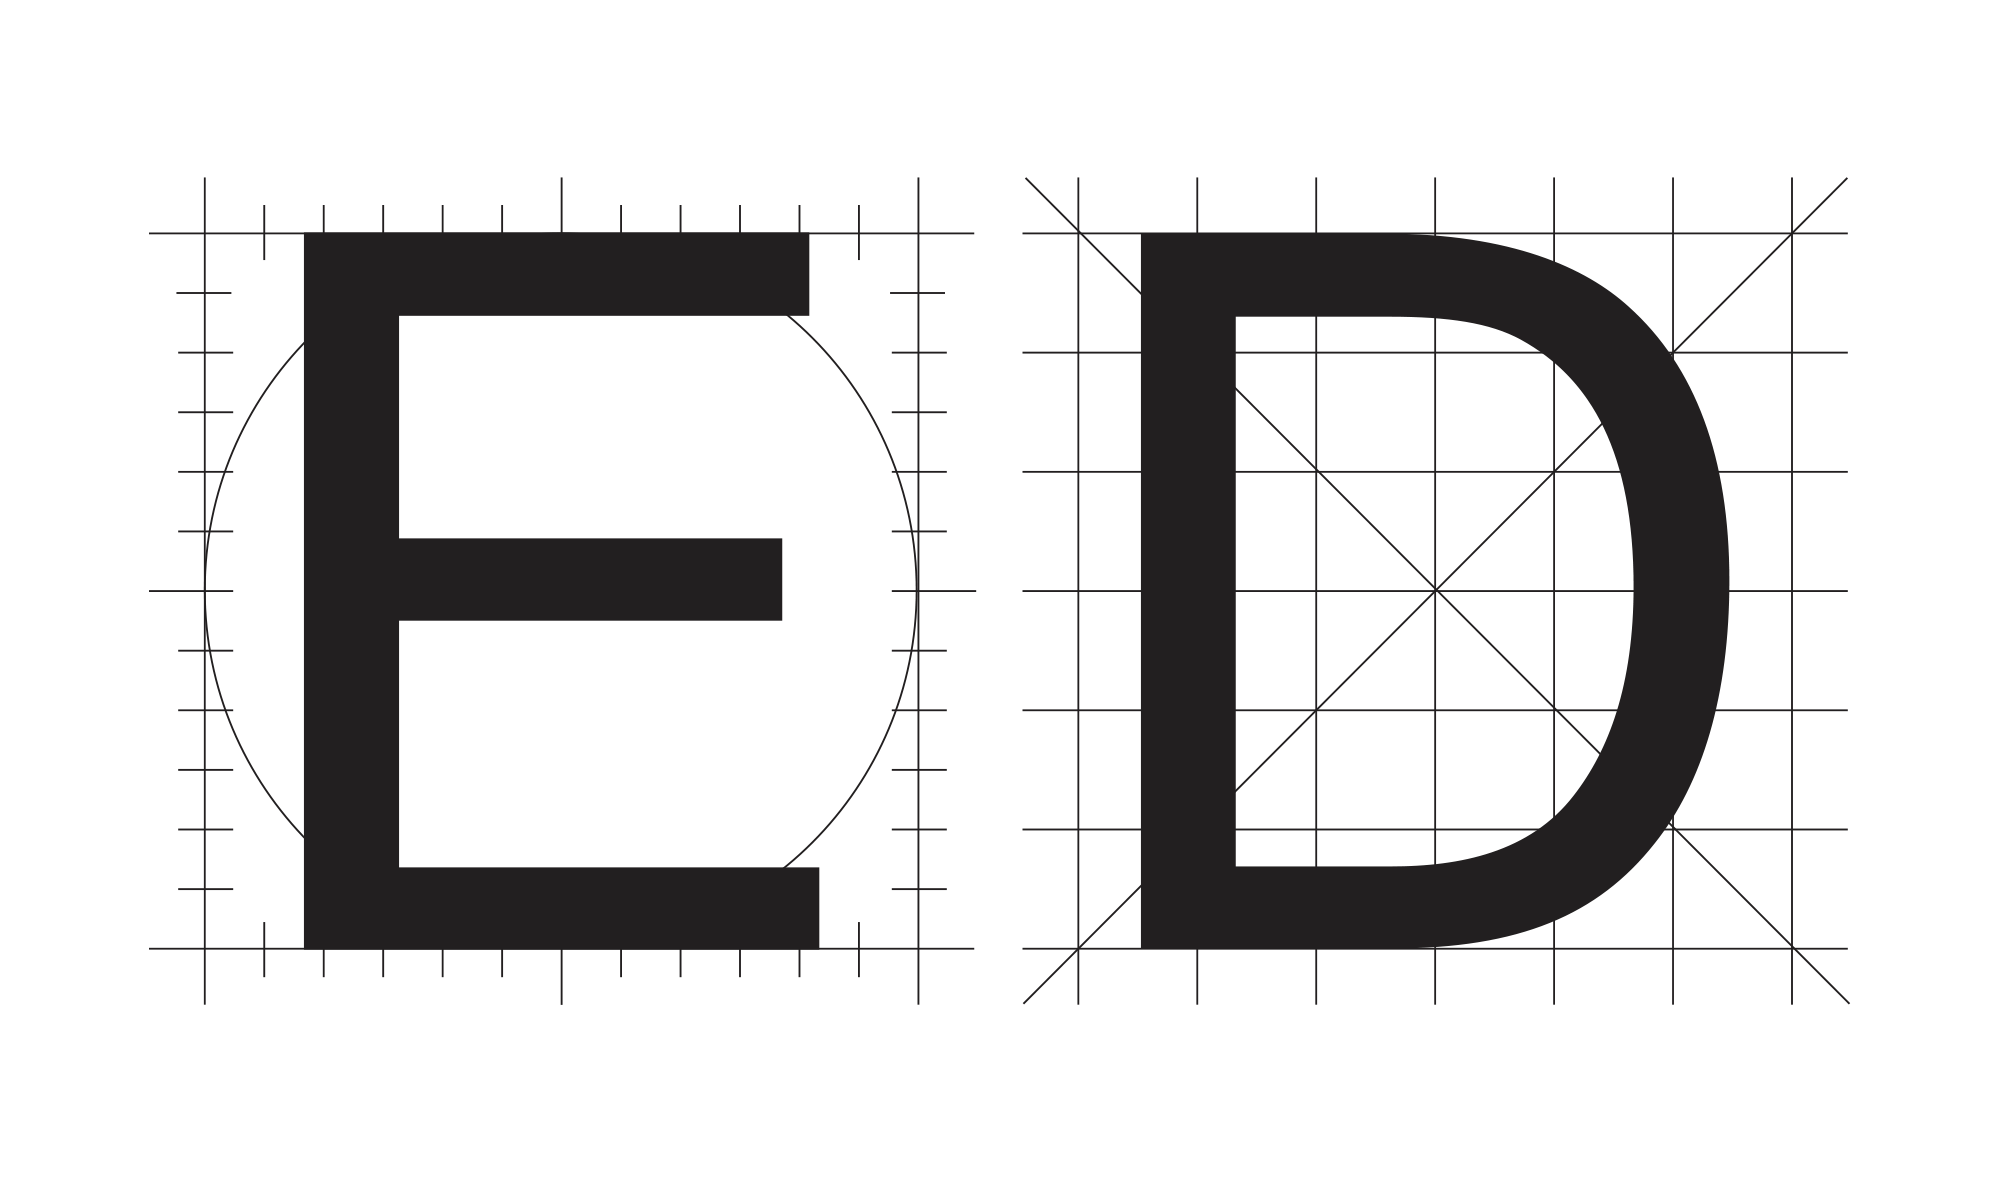 Call for Submissions now open for 'Ed' #2: Disaster!